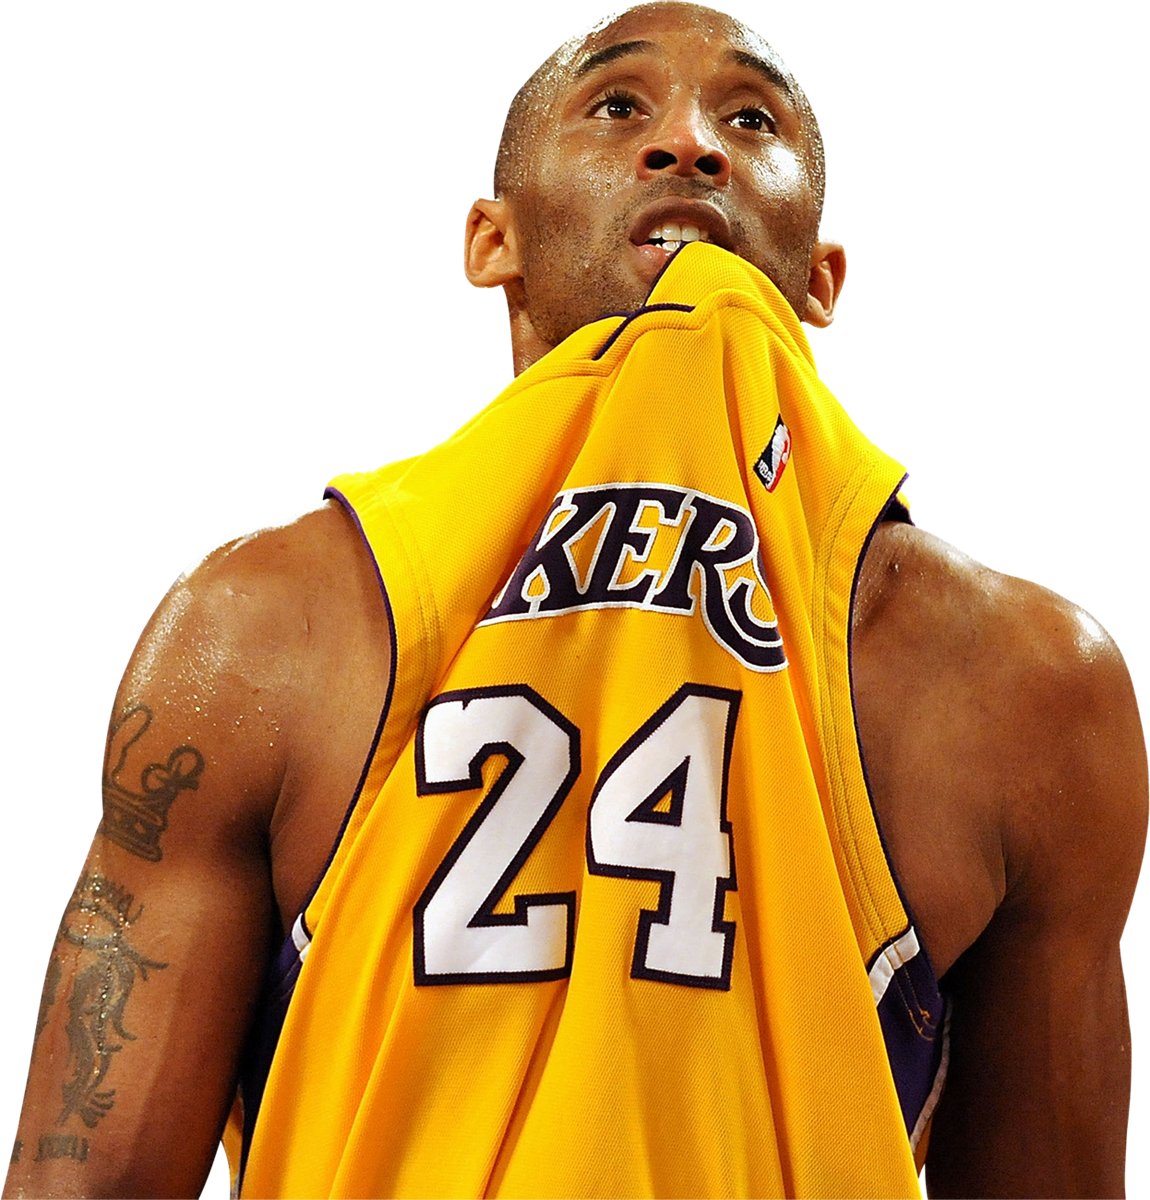 List 102+ Pictures Images Of Kobe Bryant Completed